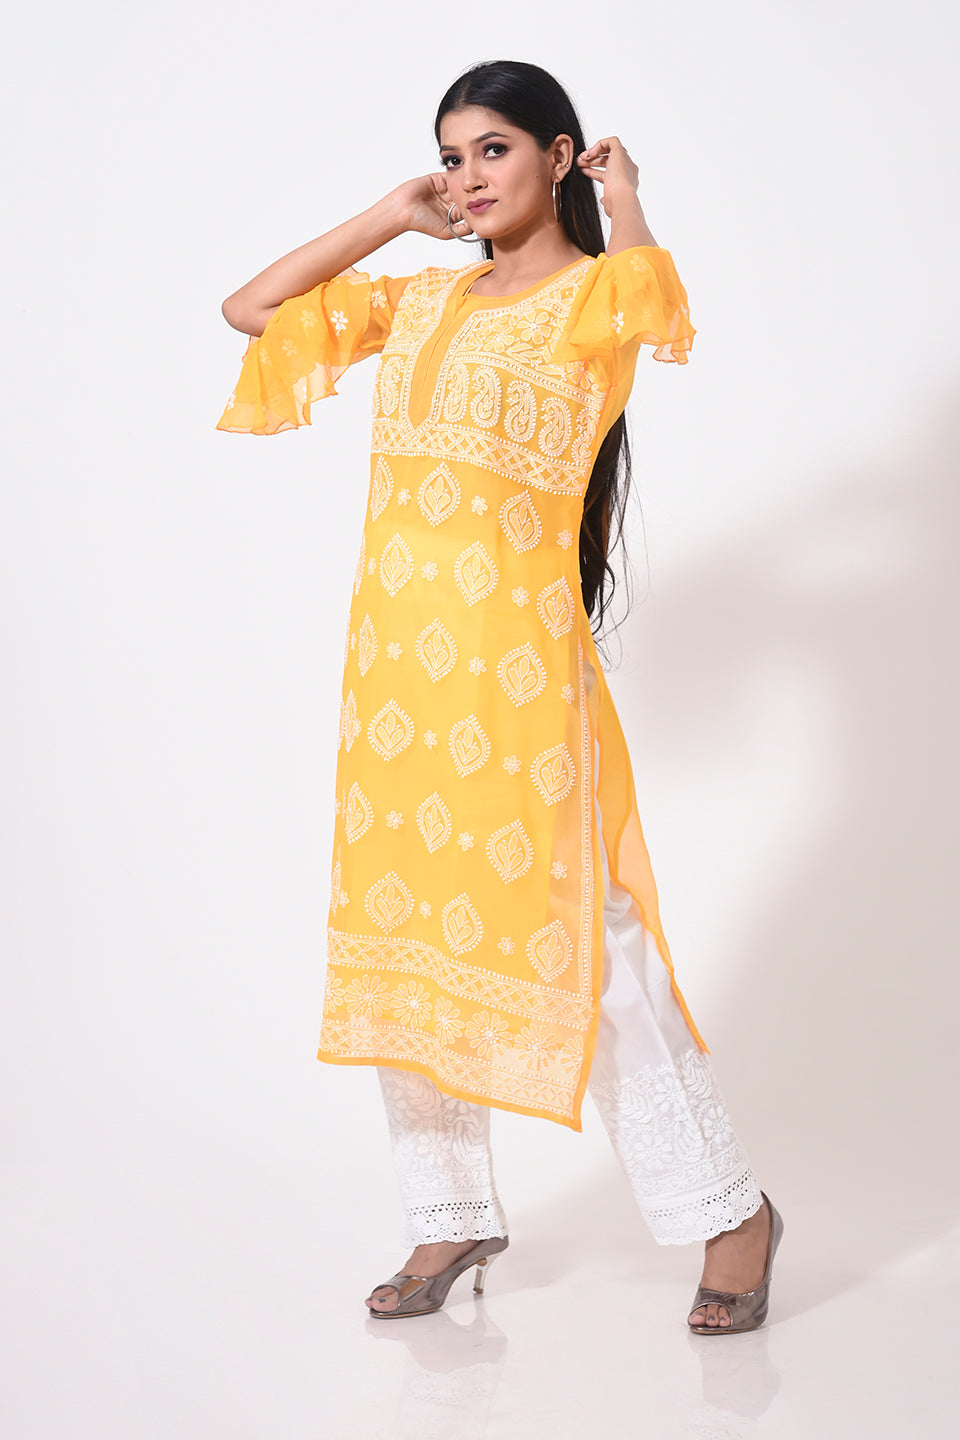 Saugaat by Monti Chikan - STOCK CLEARANCE SPECIAL DISCOUNT ! Front Open  Chikankari kurti for Rs 1299/- Buy now . #chikankari #chikankariwork  #chikankurti #chikanembroidery #lucknowichikan#chikankariembroidery  #lucknowiembroidery #shopping ...